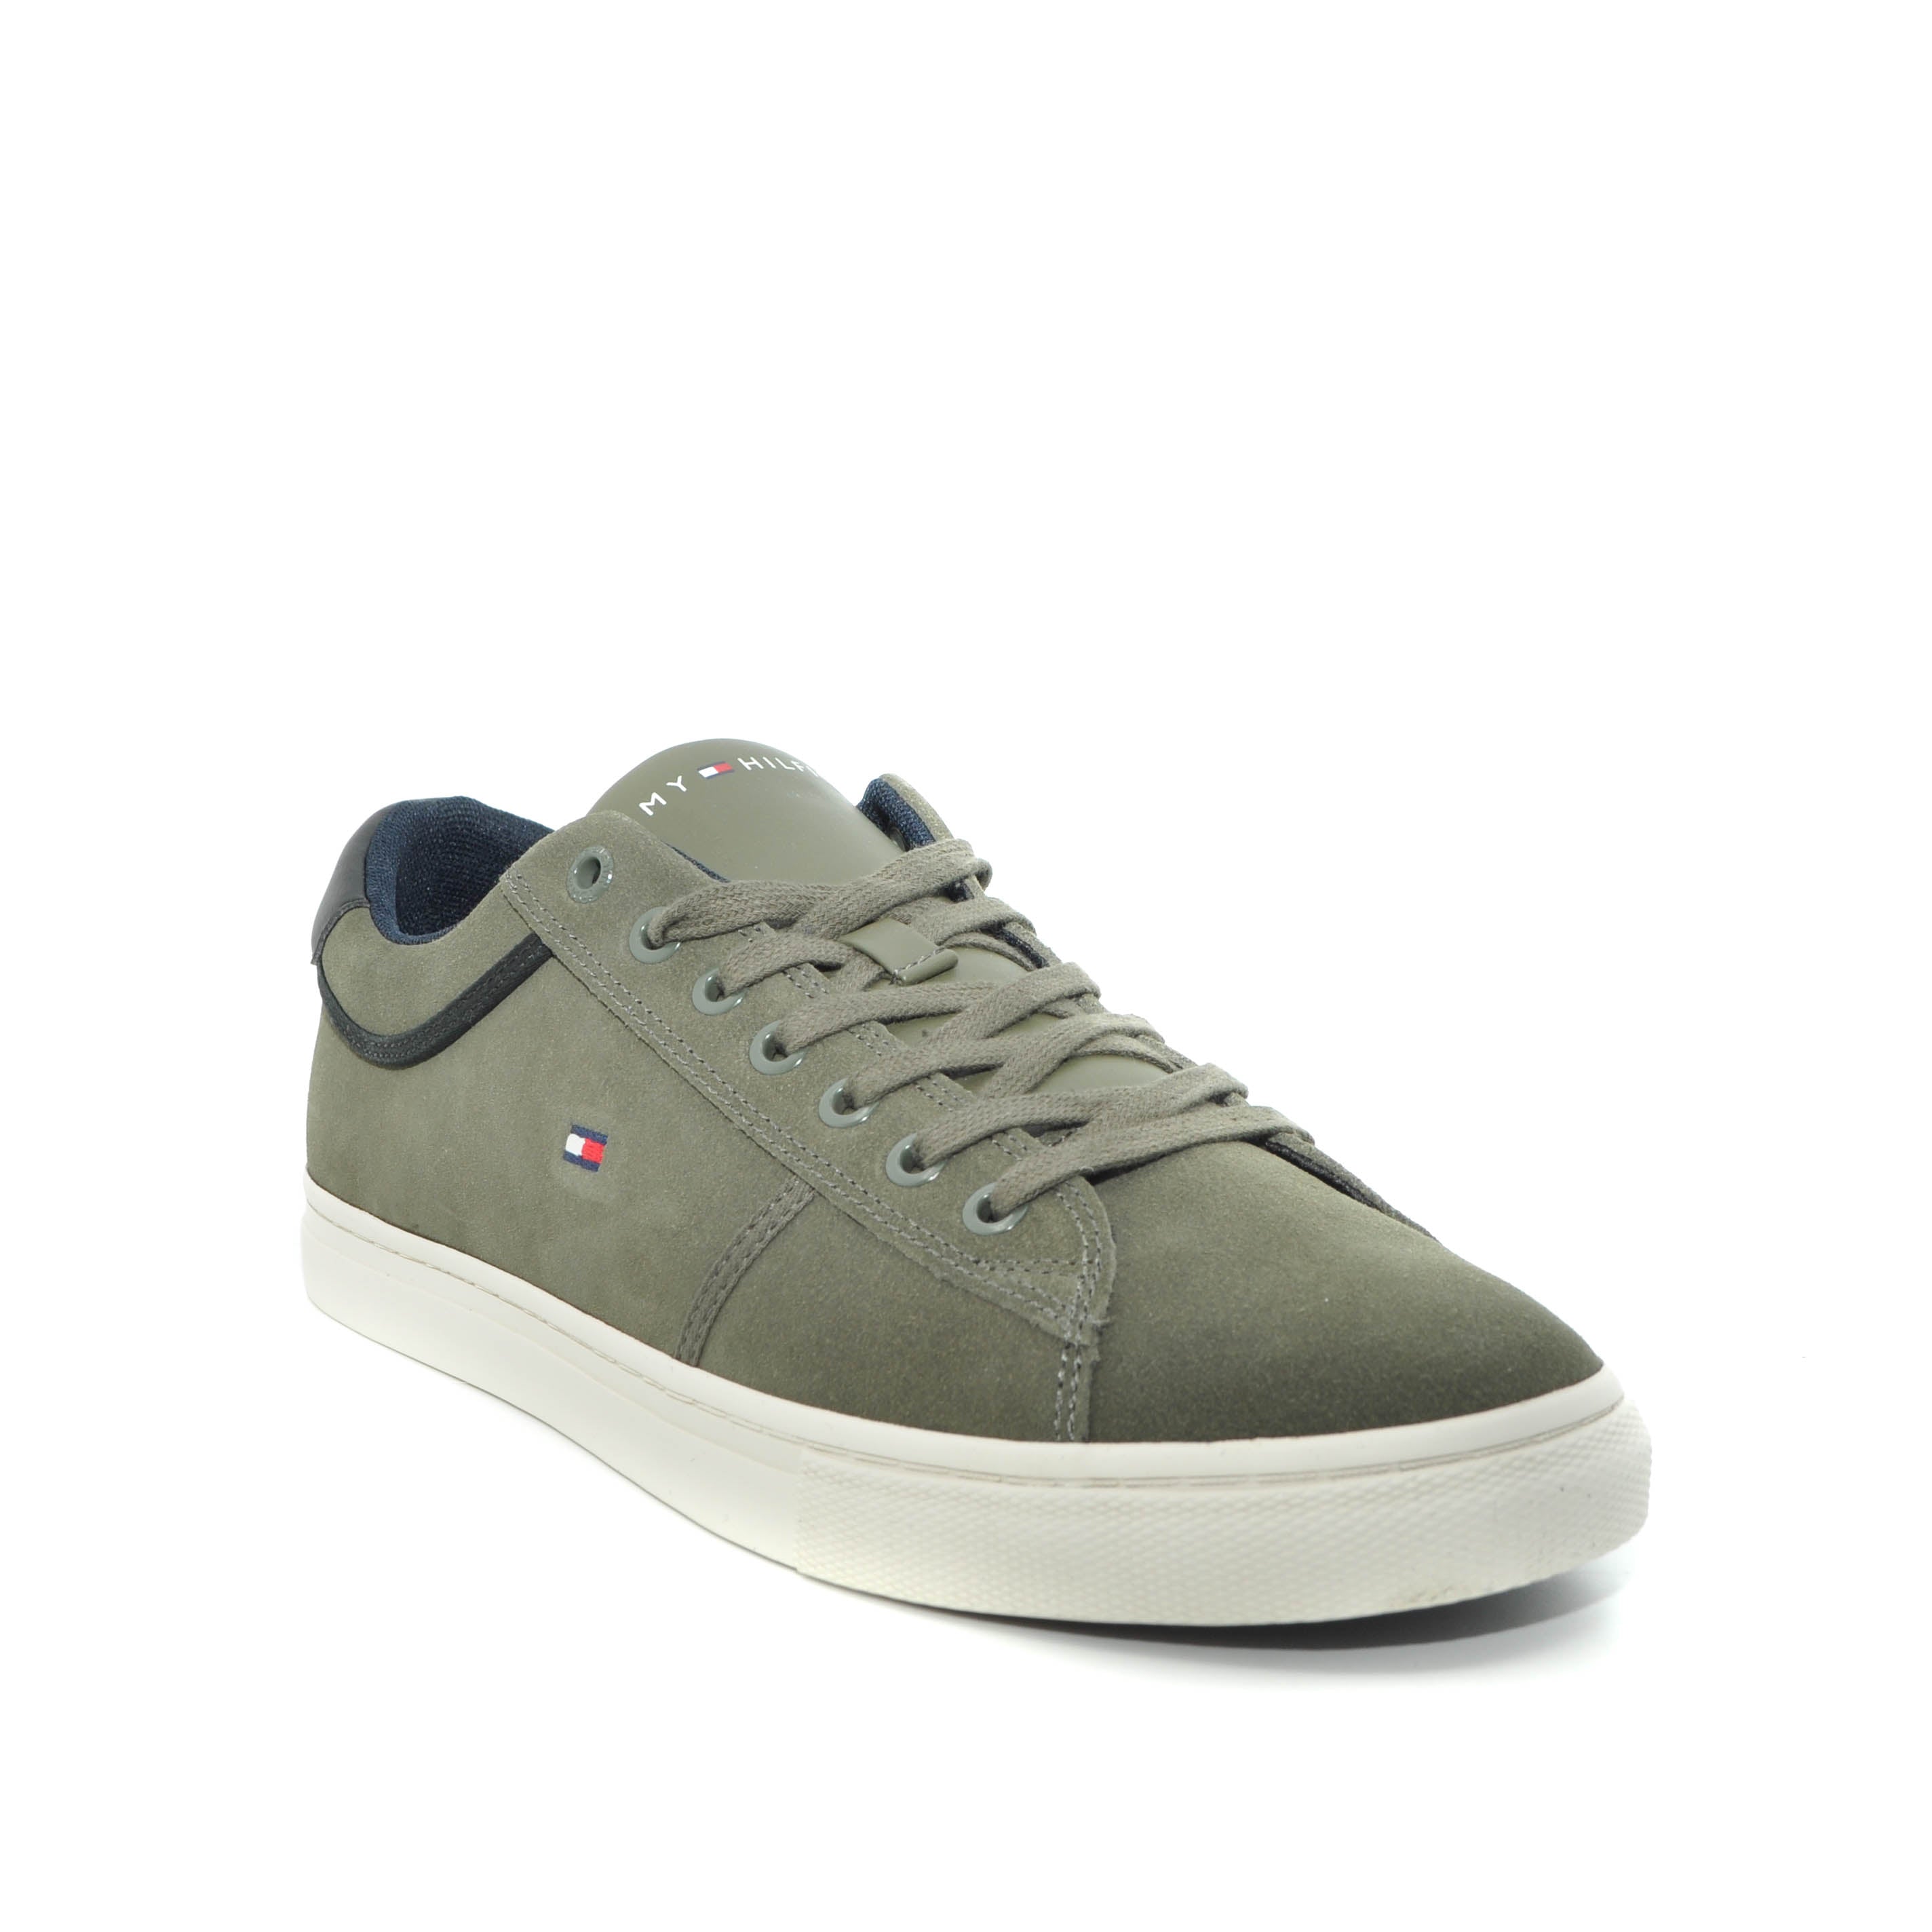 Tommy Hilfiger mens trainers